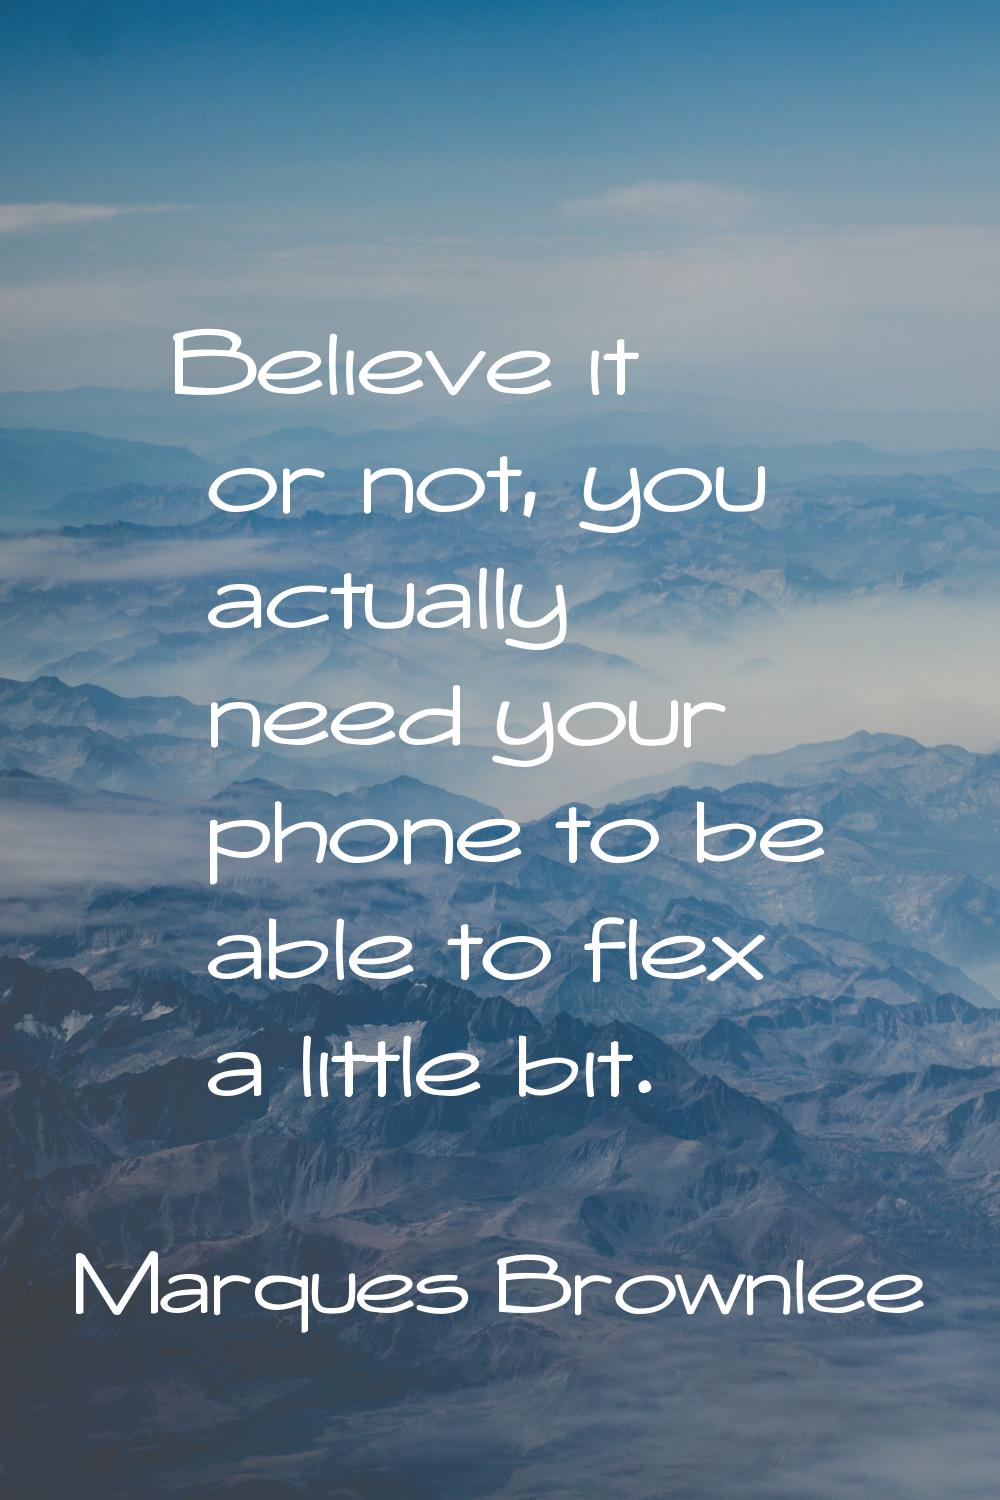 Believe it or not, you actually need your phone to be able to flex a little bit.